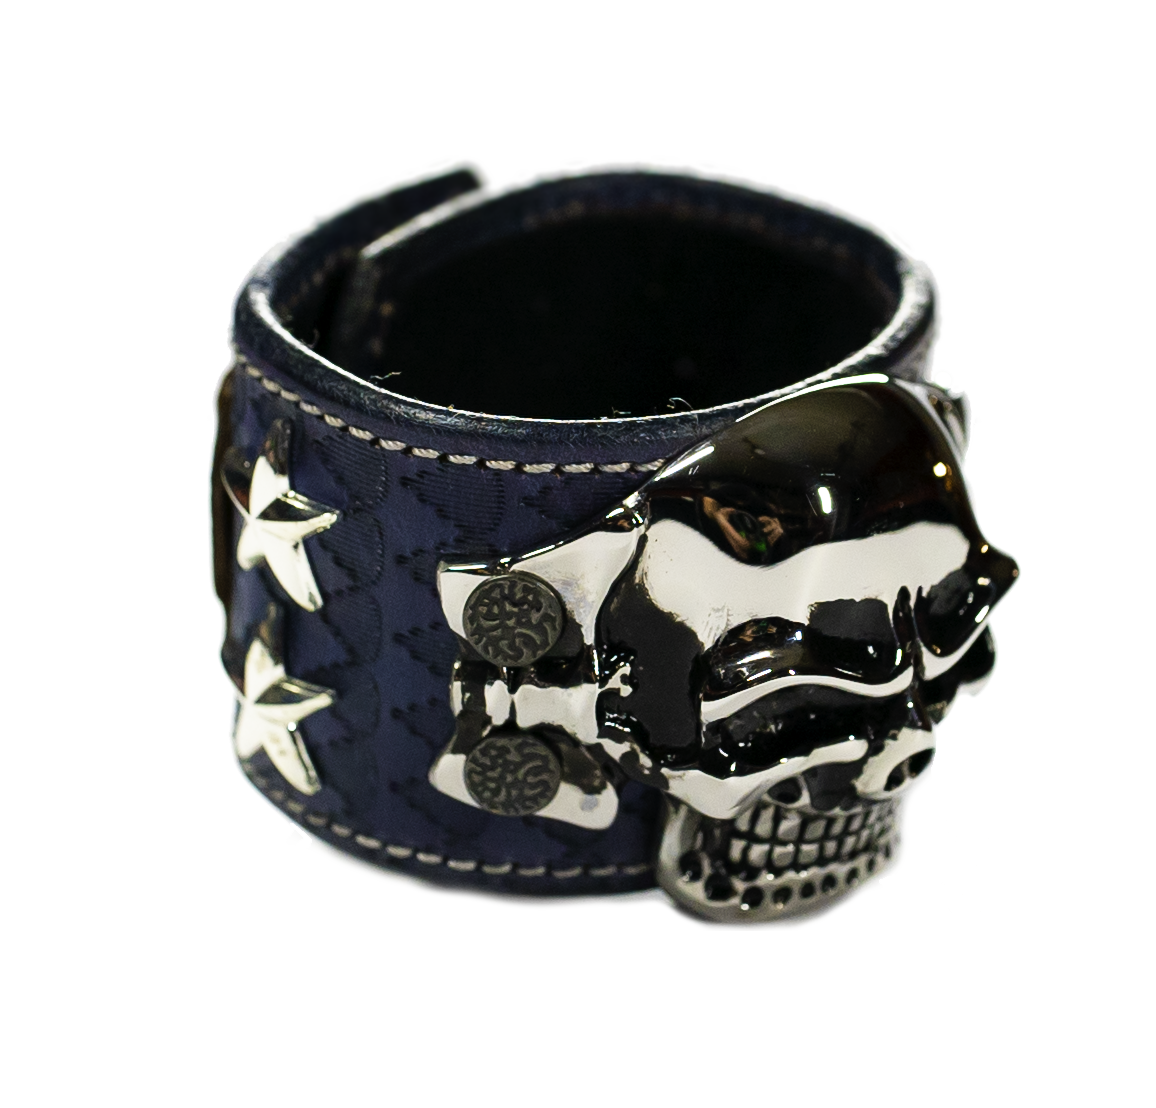 The Big Skull Navy Leather